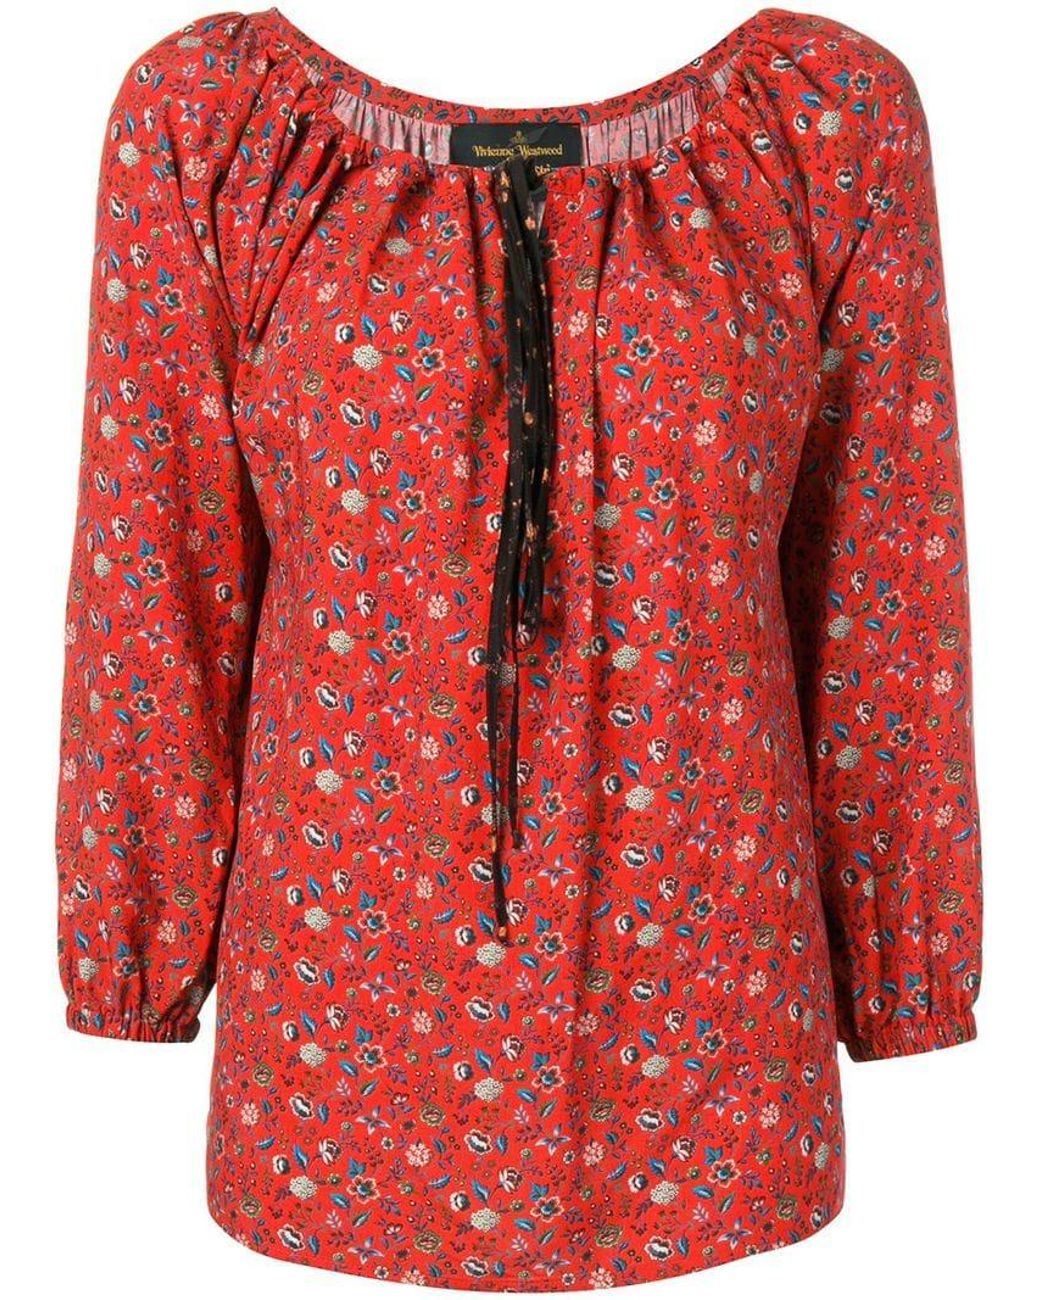 Vivienne Westwood Anglomania Floral Print Blouse in Red - Save 55% - Lyst